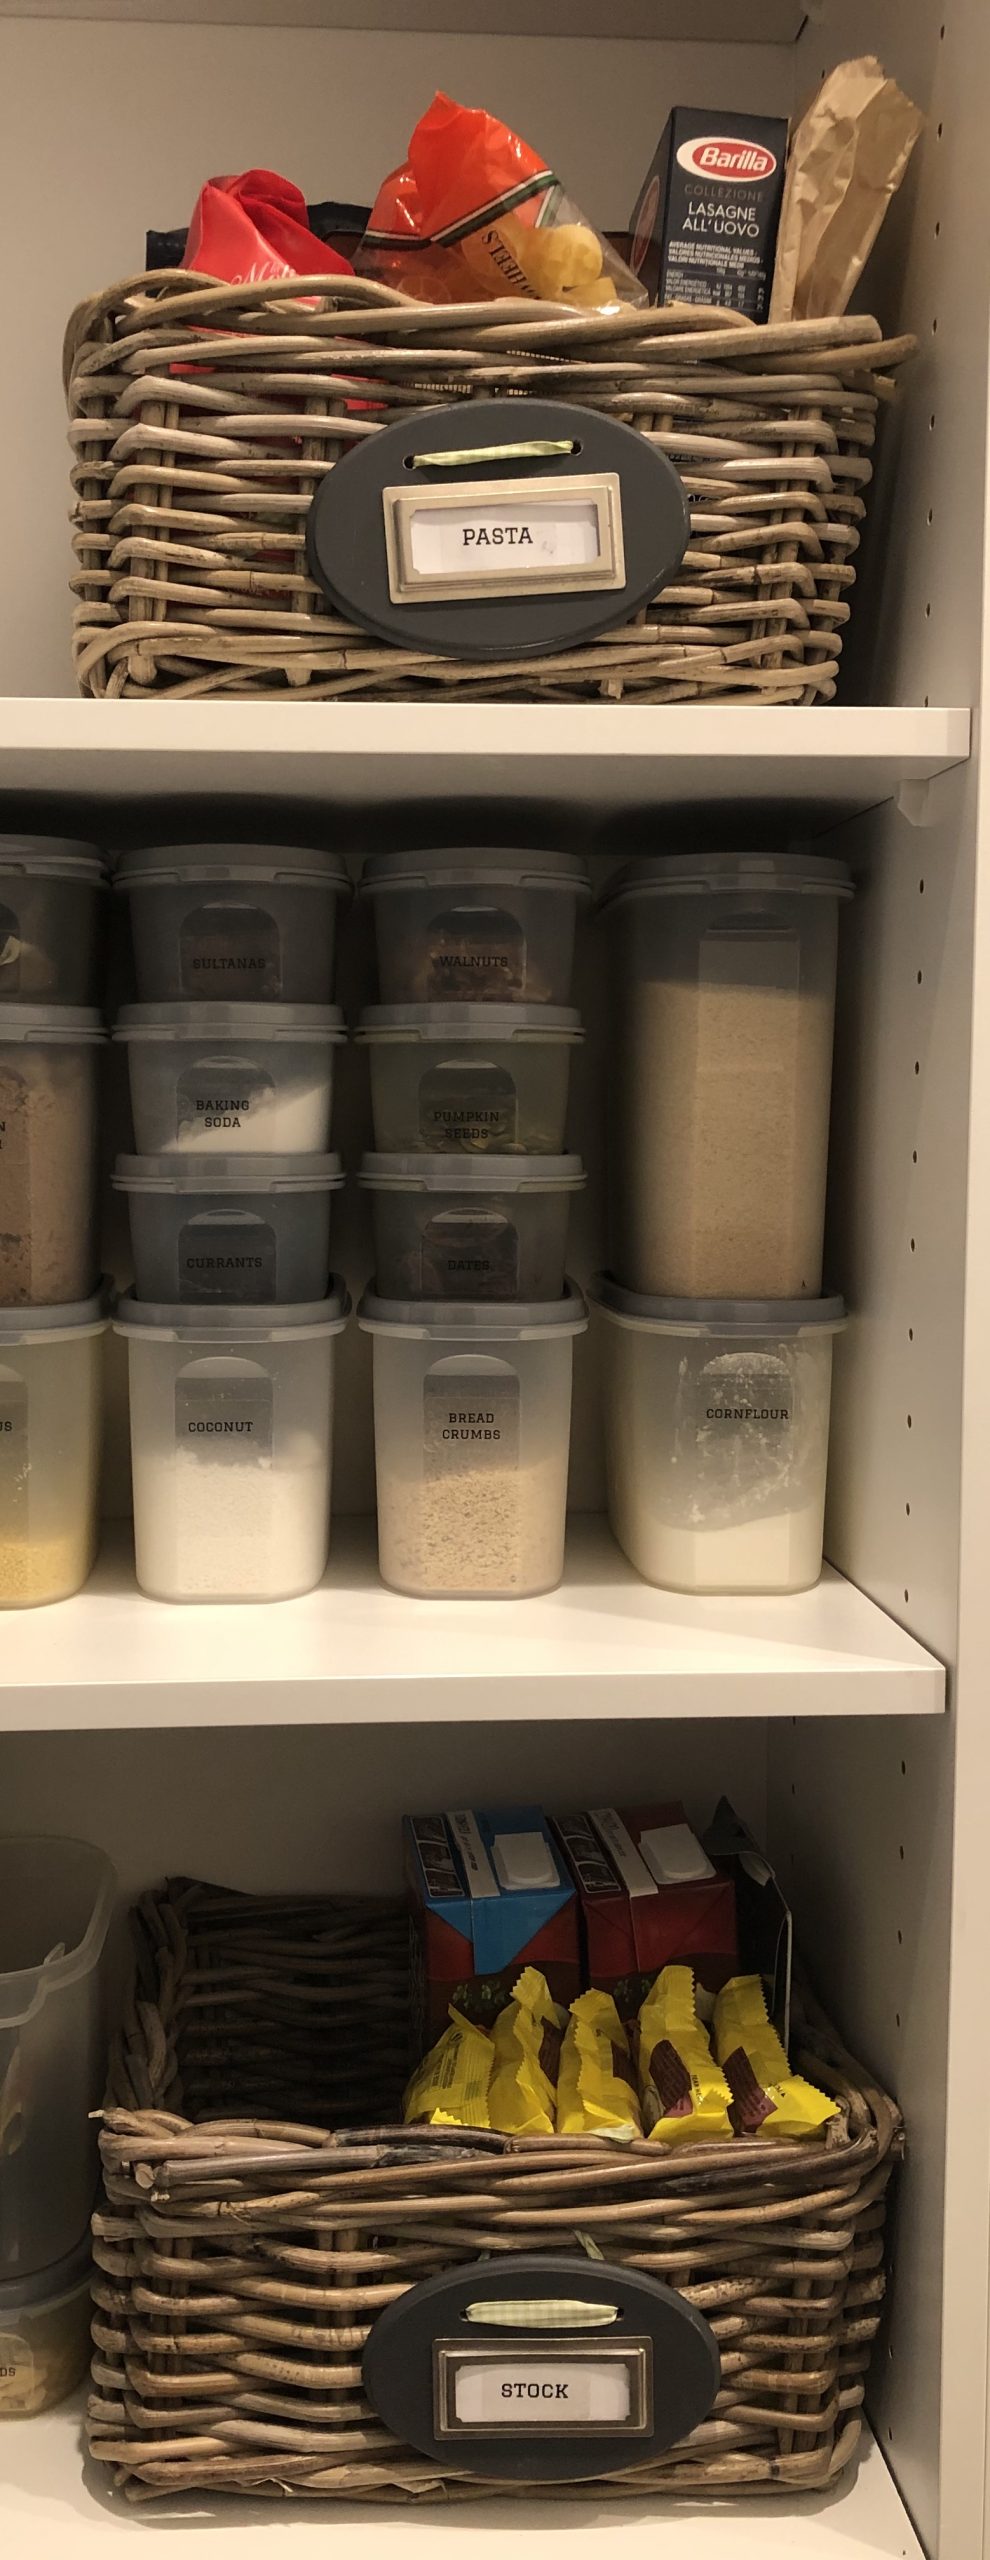 Sharing my tips for a quick pantry organisation.